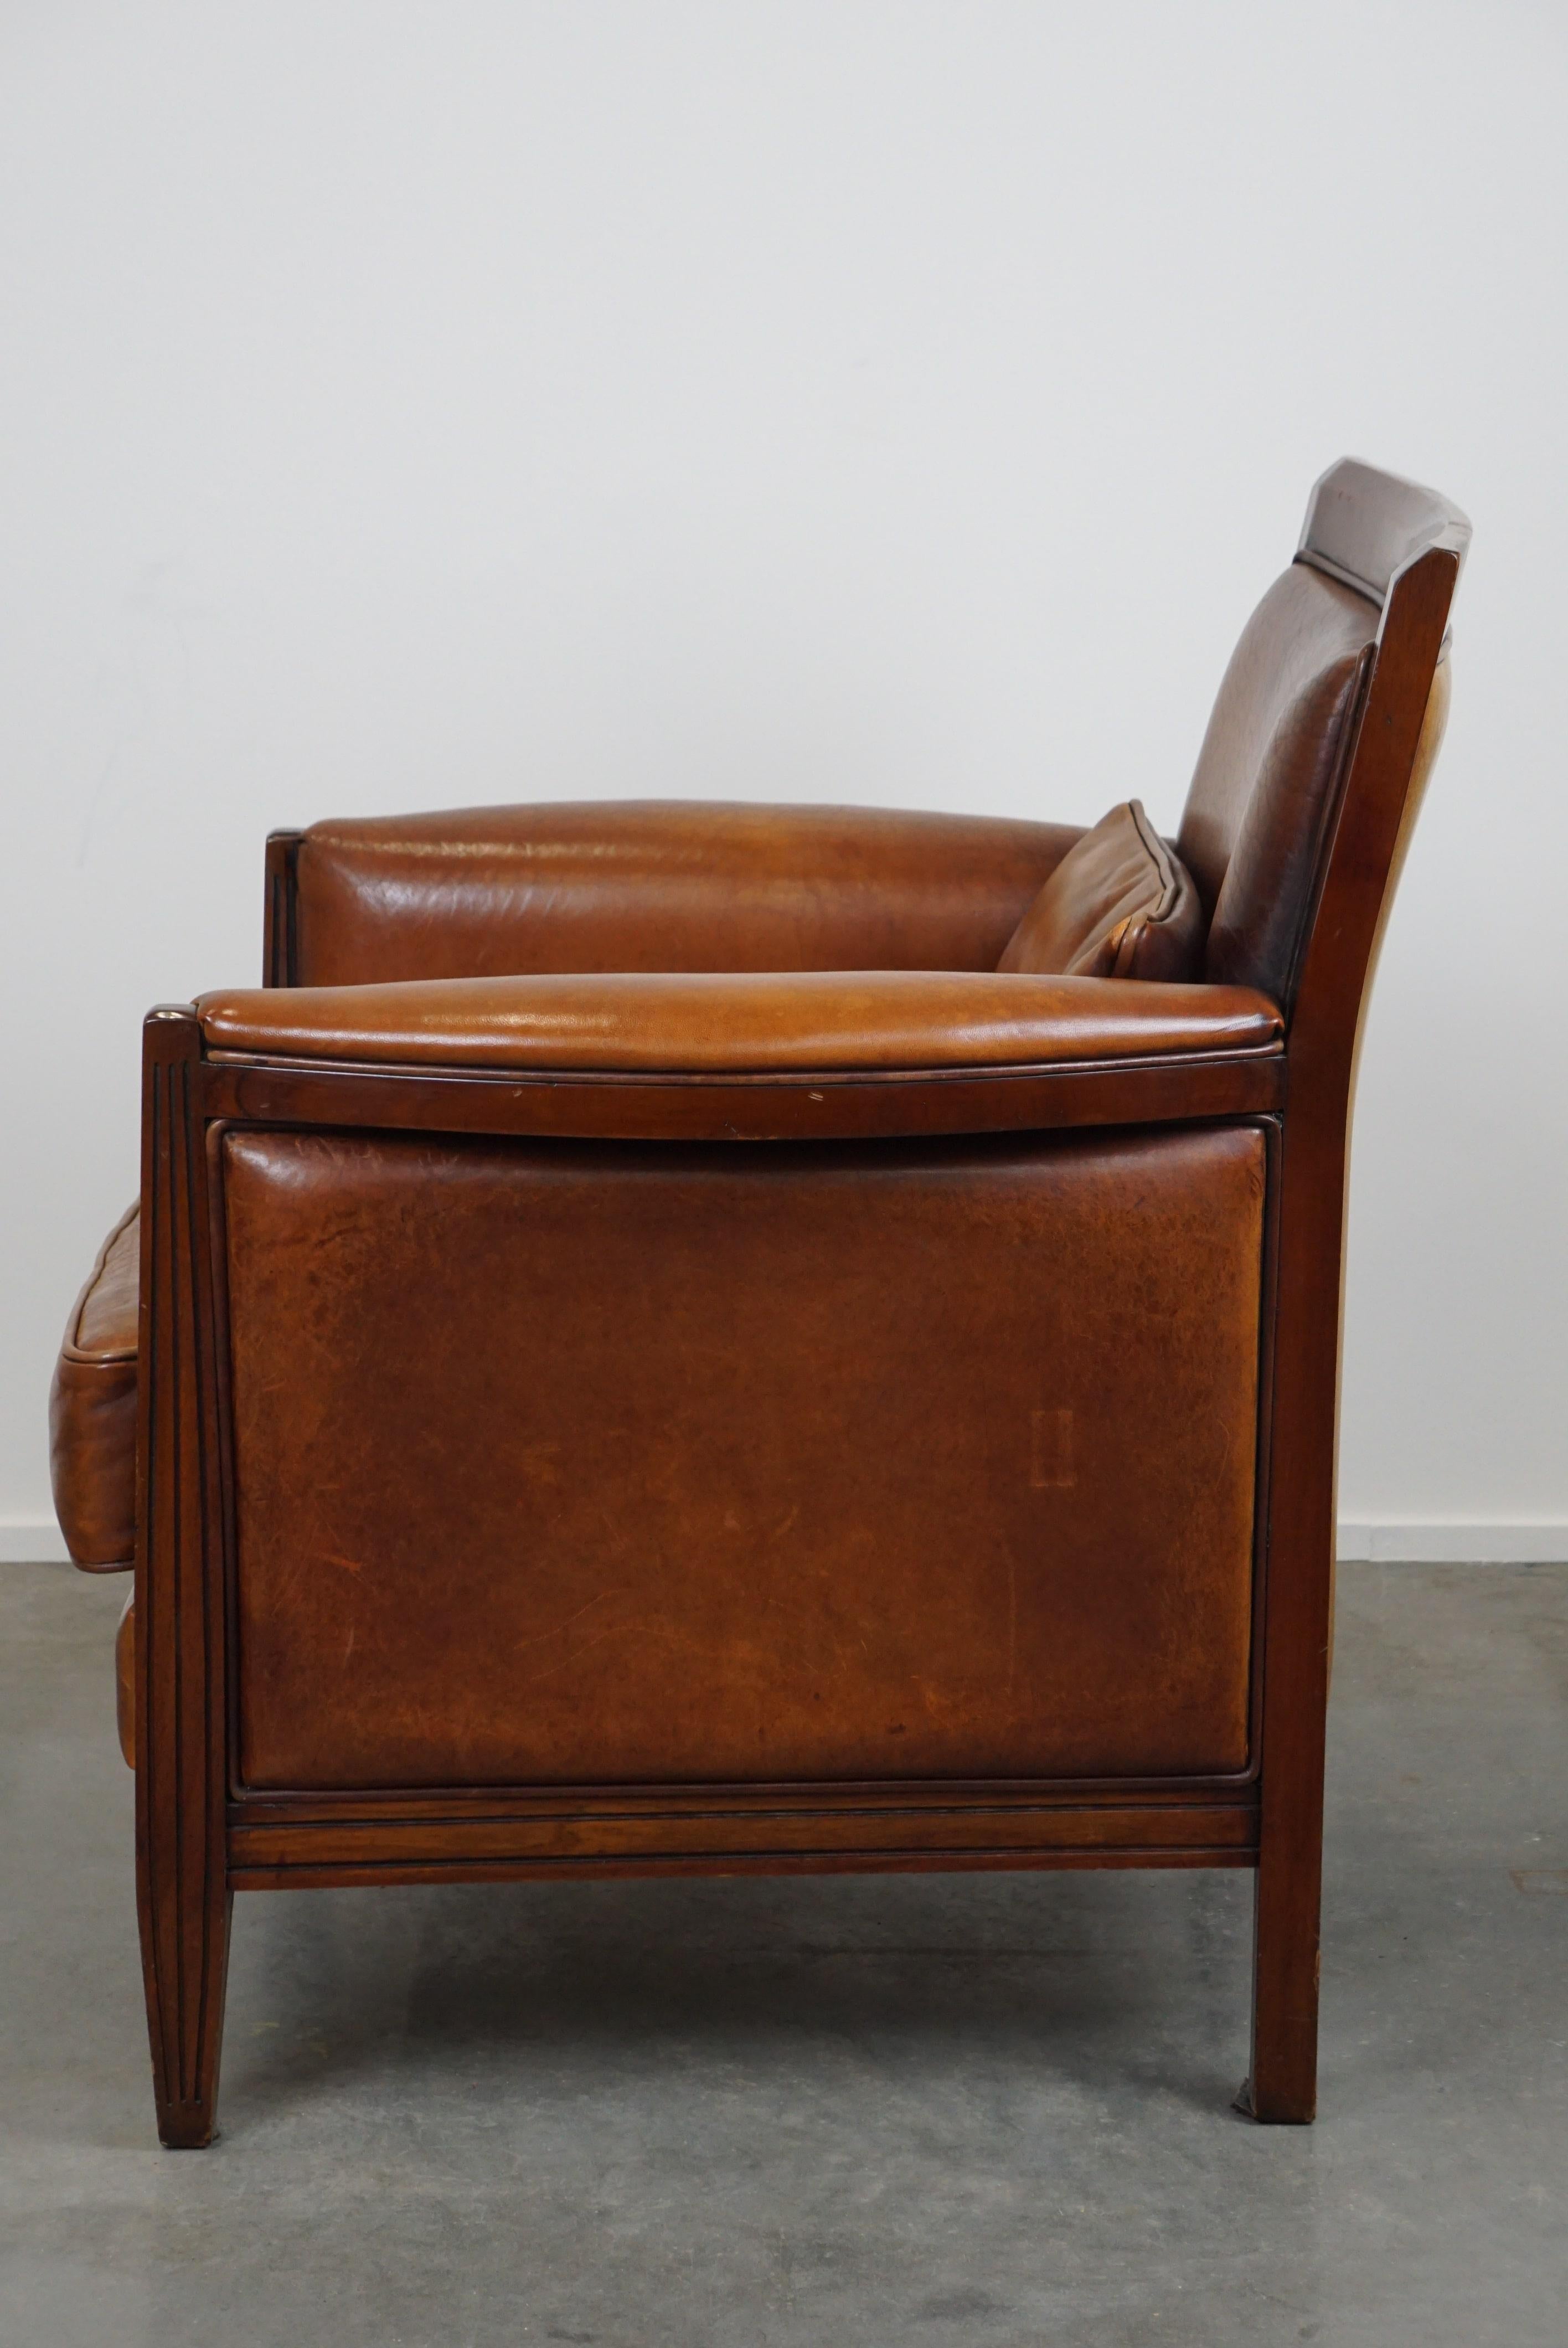 Leather Sheep leather Art Deco design armchair with high seating comfort For Sale